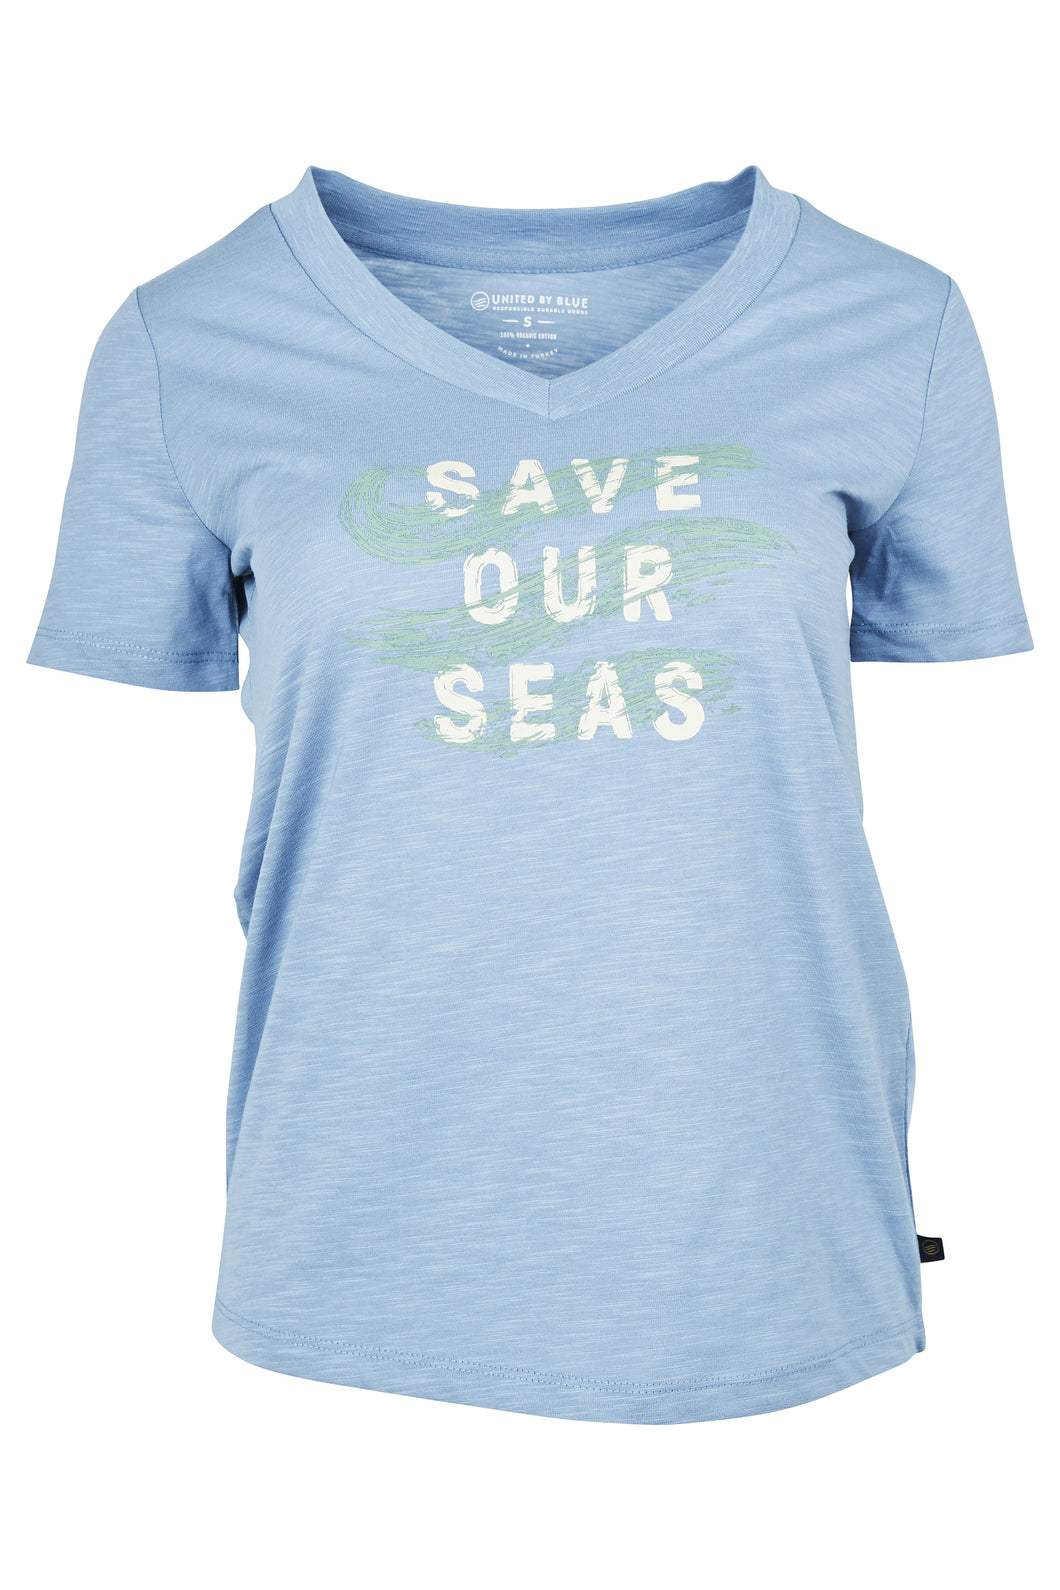 Save Our Seas S/S Graphic V-Neck